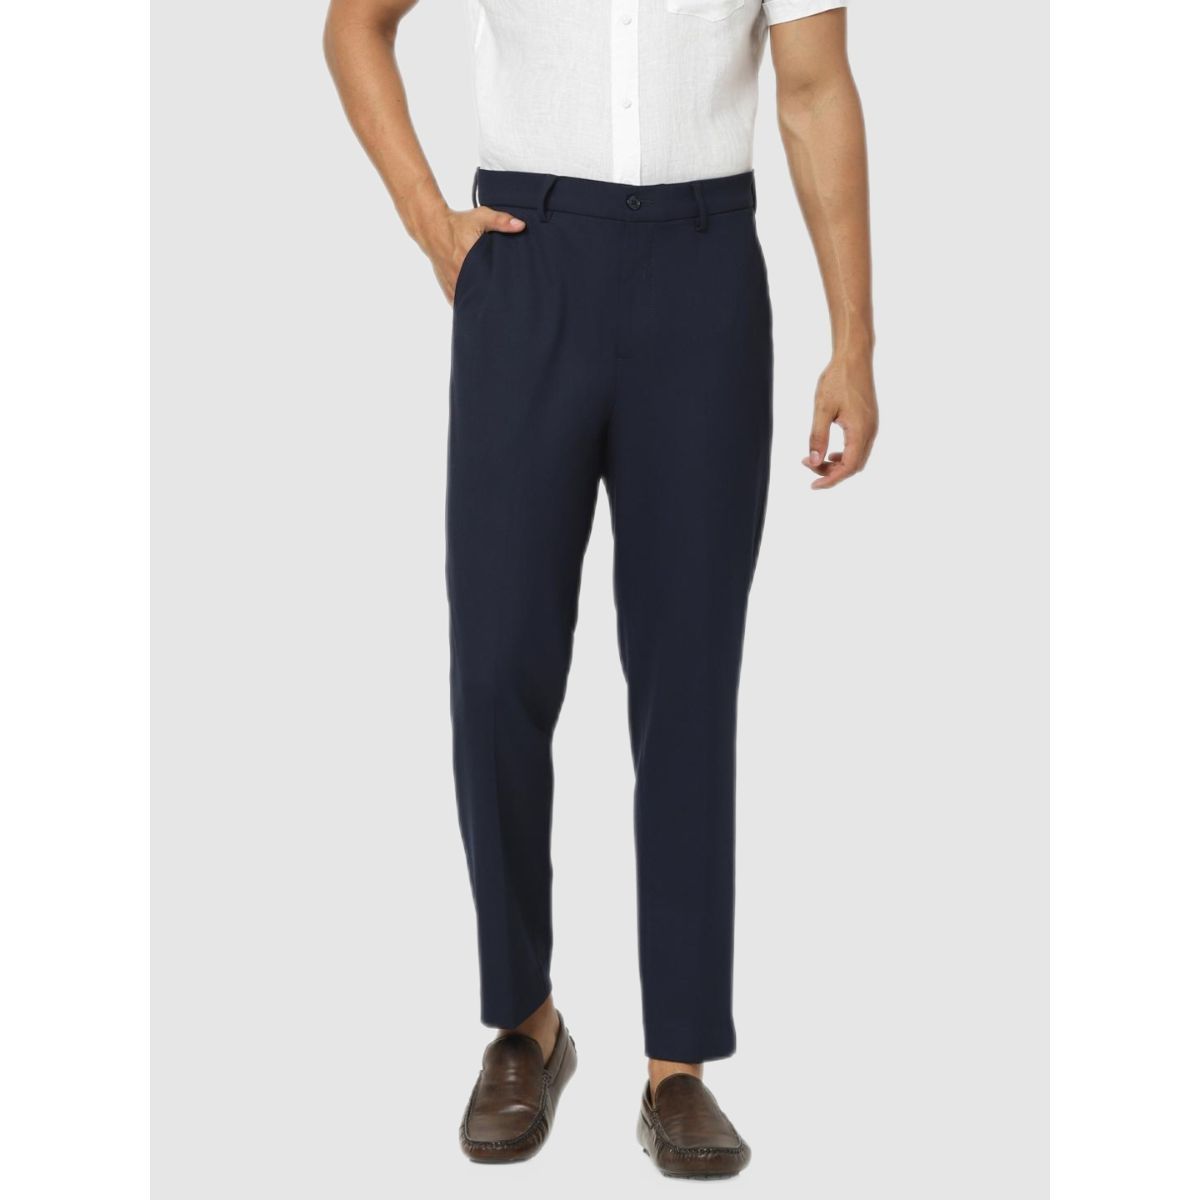 celio - 🔥 We're hot at Celio with our extra comfy drawstring trousers !  celio* price: €39.99 https://bit.ly/3zov8kb | Facebook